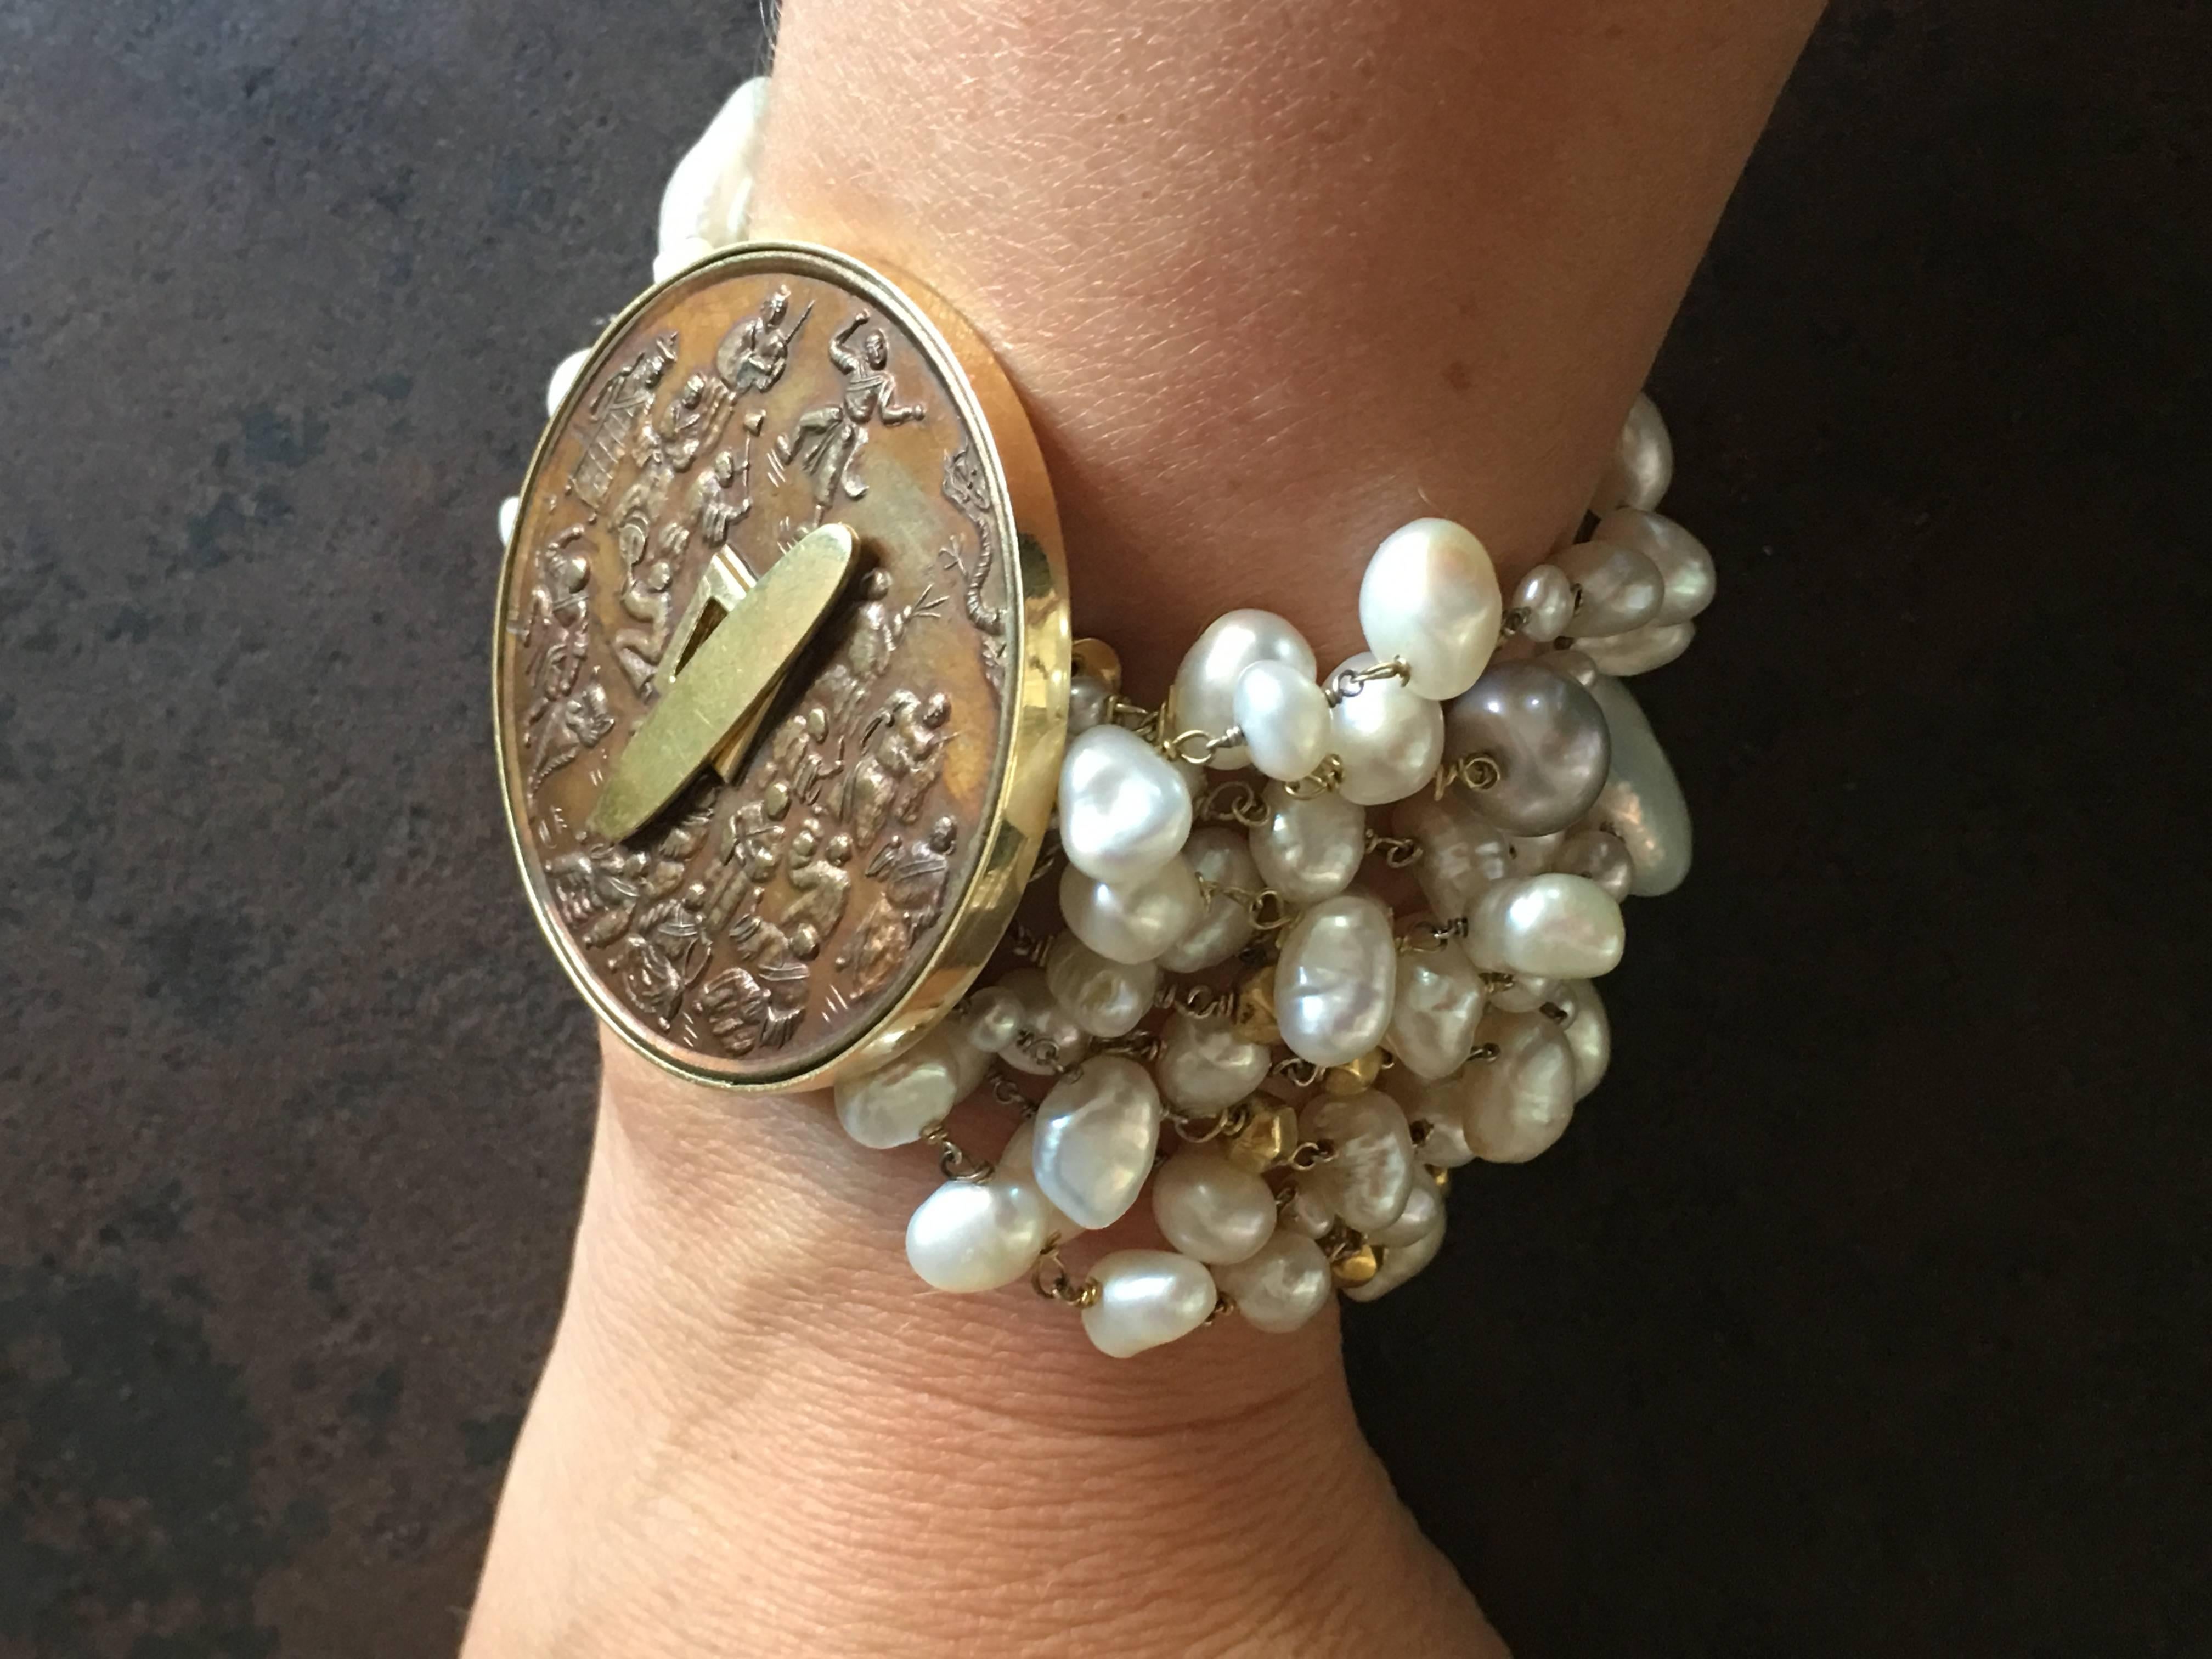 Bracelet with different color and shape of freshwater pearls, antiques Indian faced gold beads, closure with antiques Chinese carved bronze coin representing few sages, gold.
All Giulia Colussi jewelry is new and has never been previously owned or